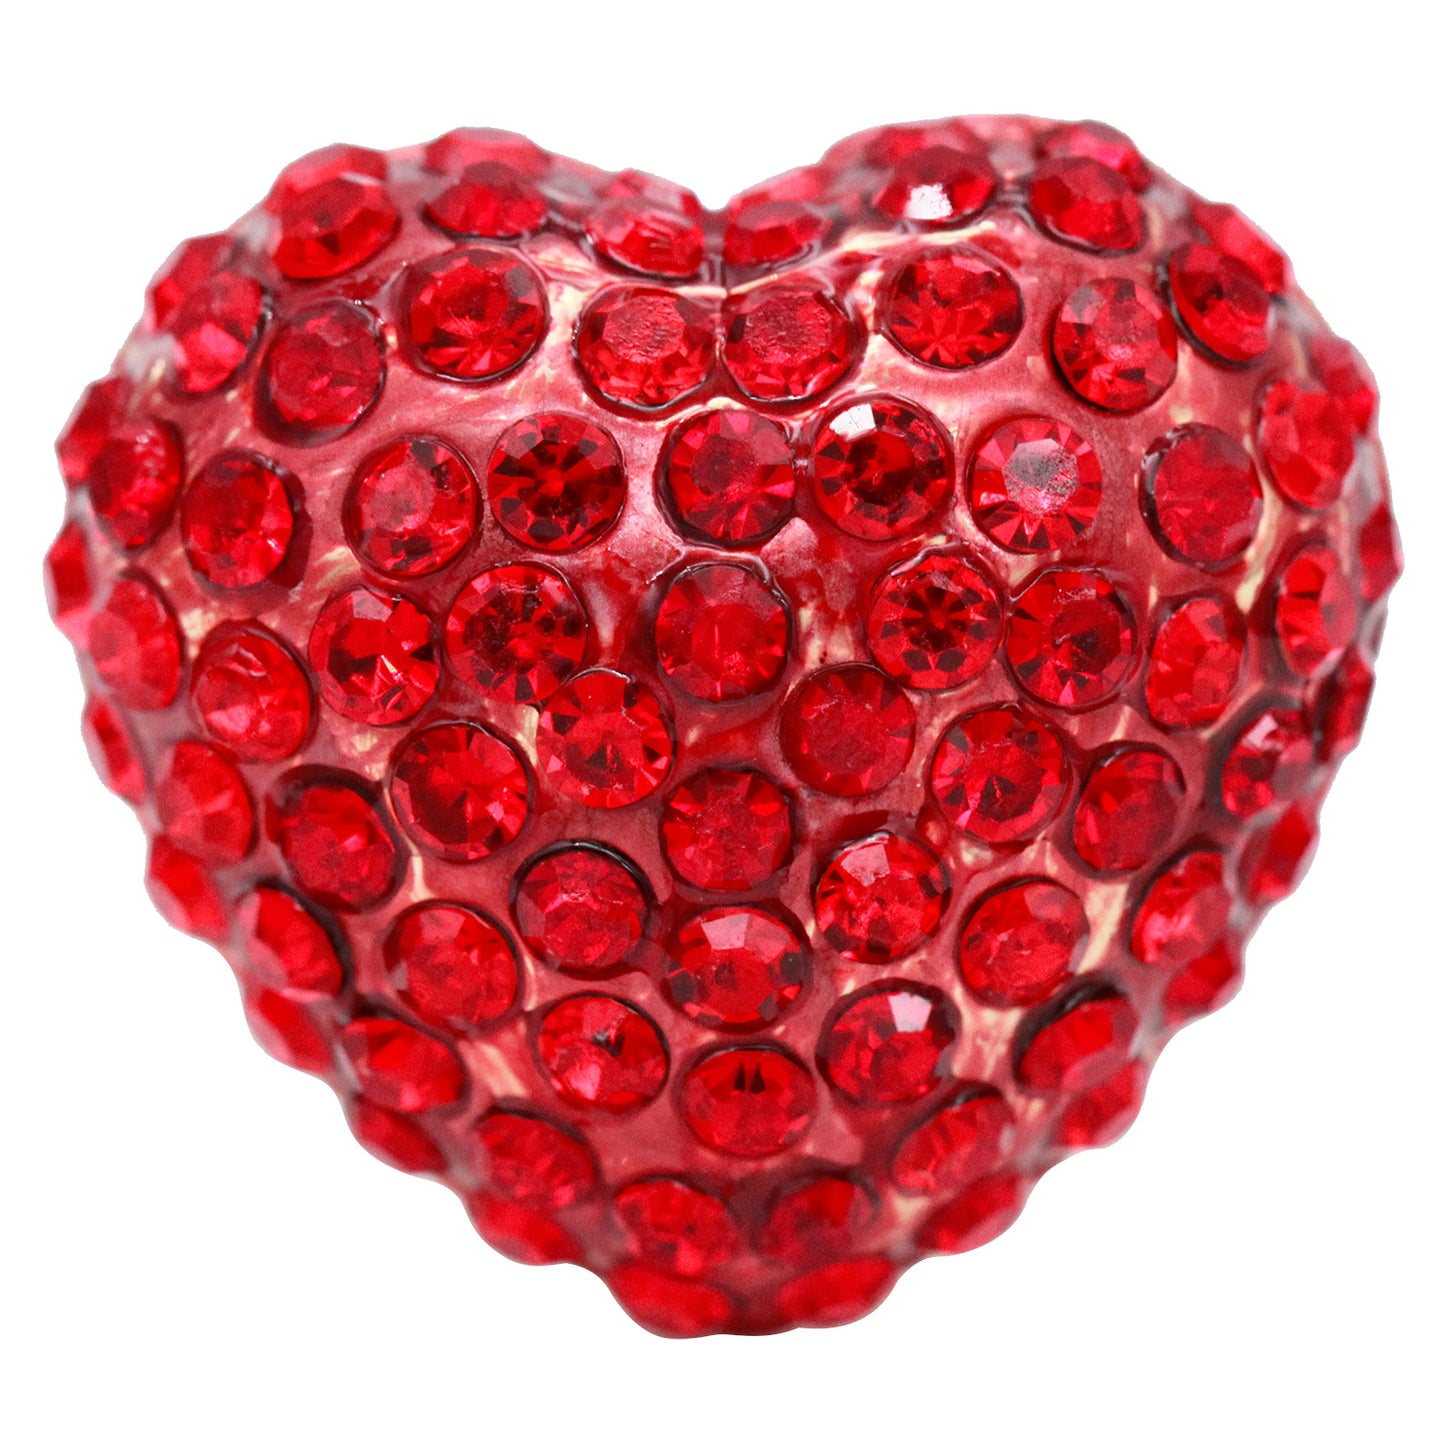 Lavencious Heart Shaped Rhinestones Stretch Rings for Women Size for 7-9(Red)